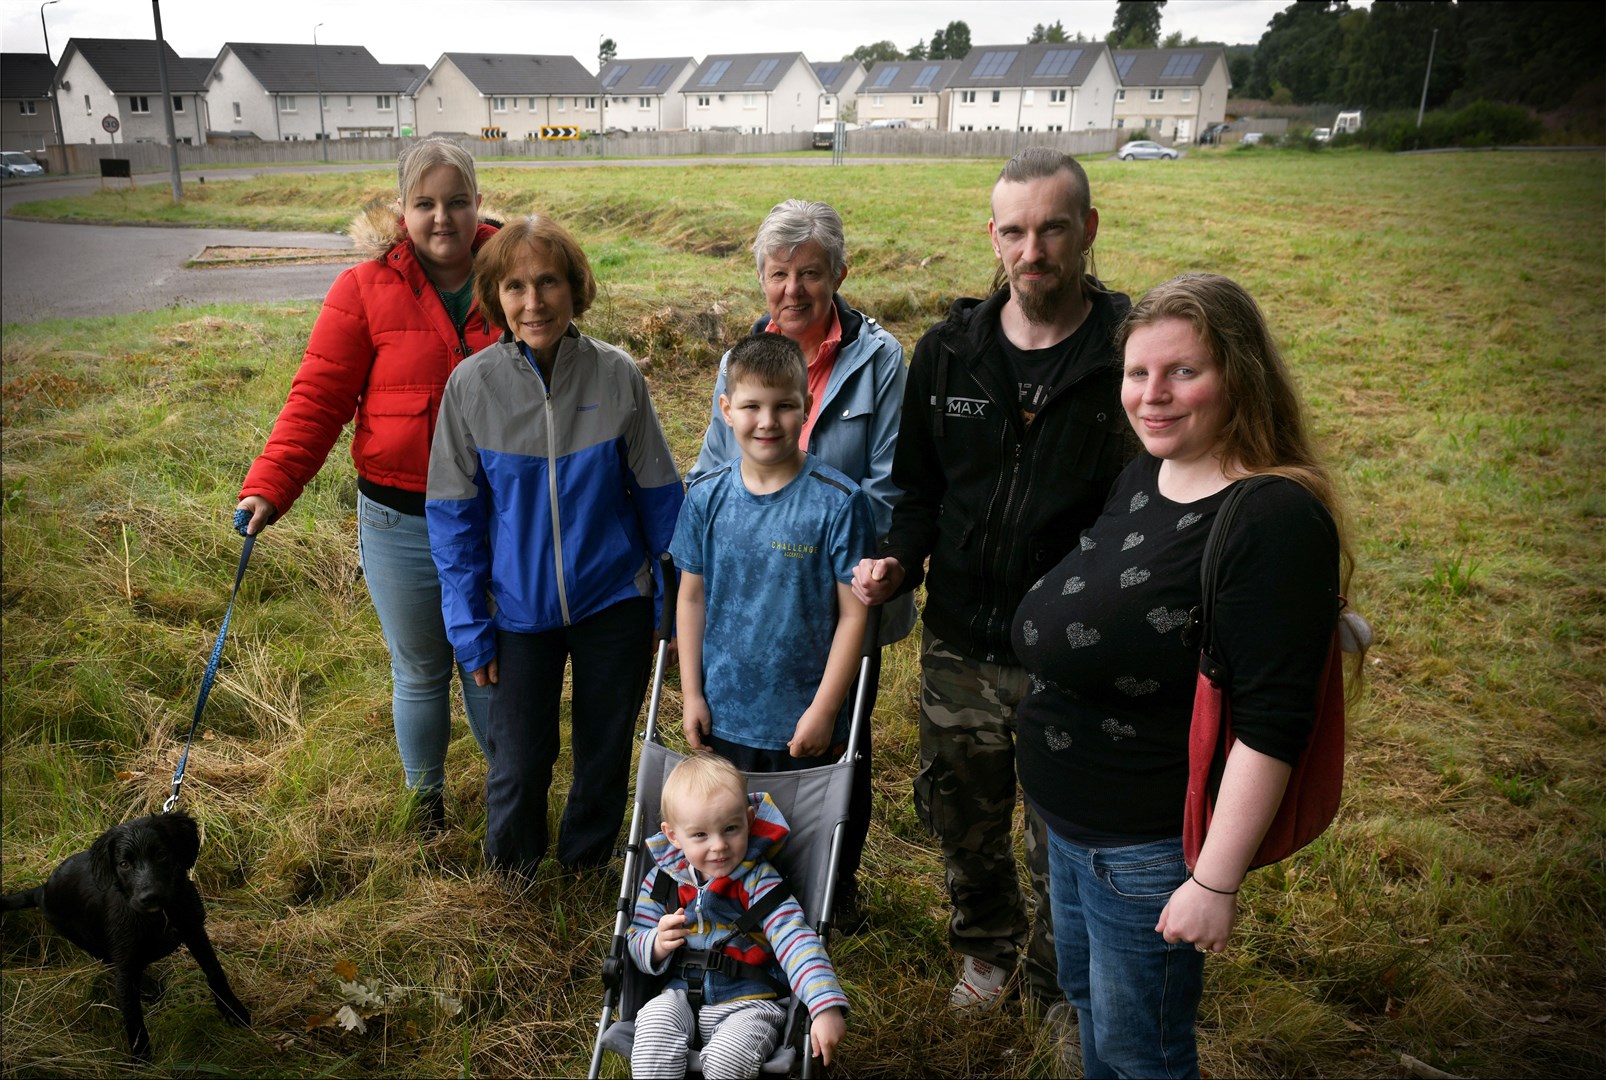 North Kessock residents Lianne Cumming, Anne Thomas, Austin Warwick-Milne, Ethan Cumming, Hazel Cumming, Gary Milne and Catriona Warwick voiced a number of concerns over plans for a new food hub. Picture: James Mackenzie.